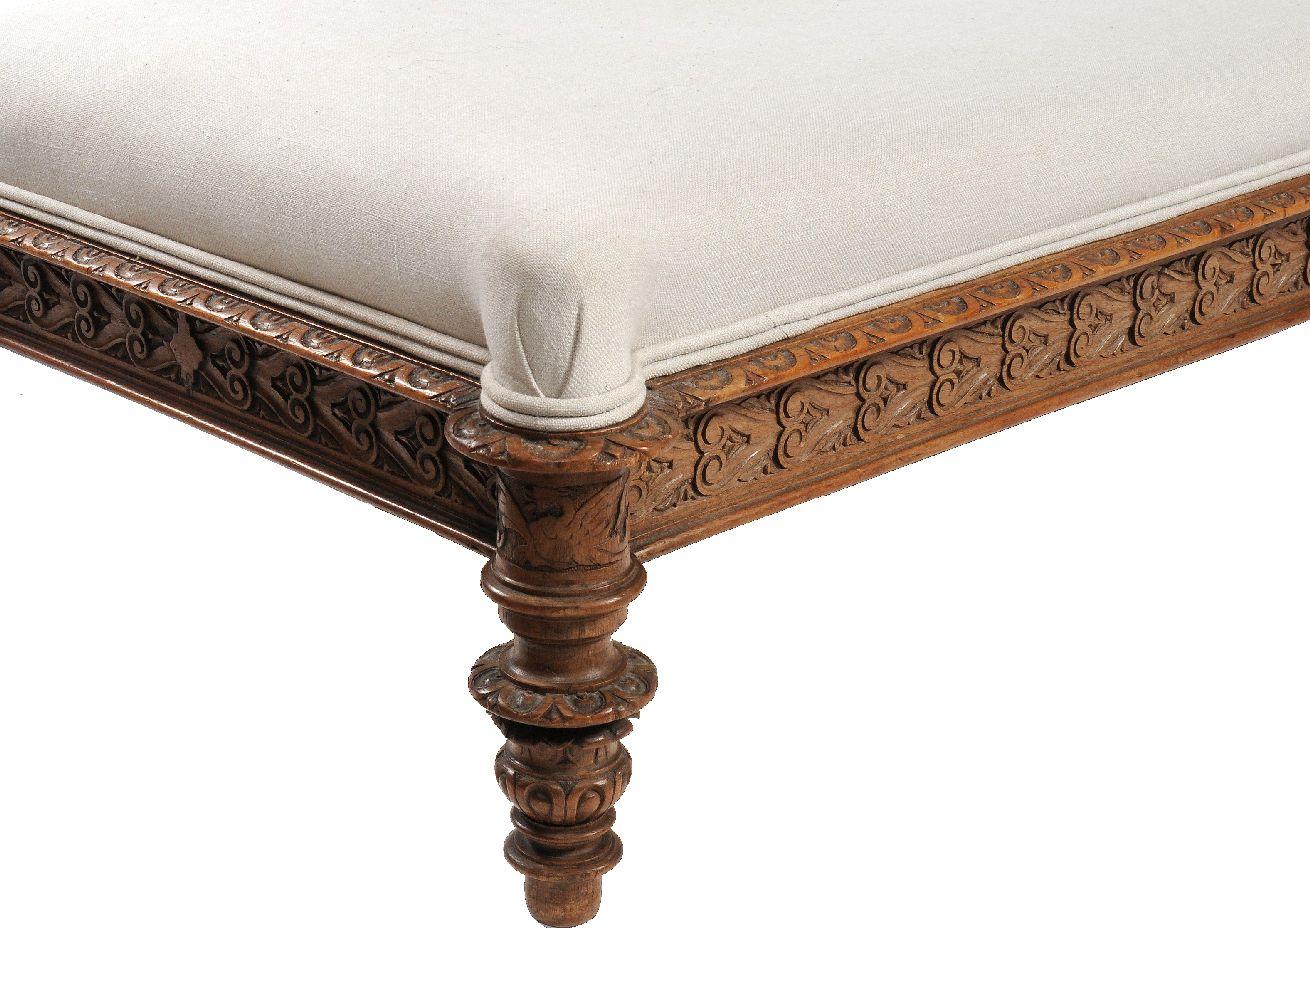 A beautifully detailed Continental carved walnut daybed in Renaissance Revival taste from the late 19th century. Having a nicely detailed pair of carved putto looking across at each other. The rectangular seat above a molded and scroll carved